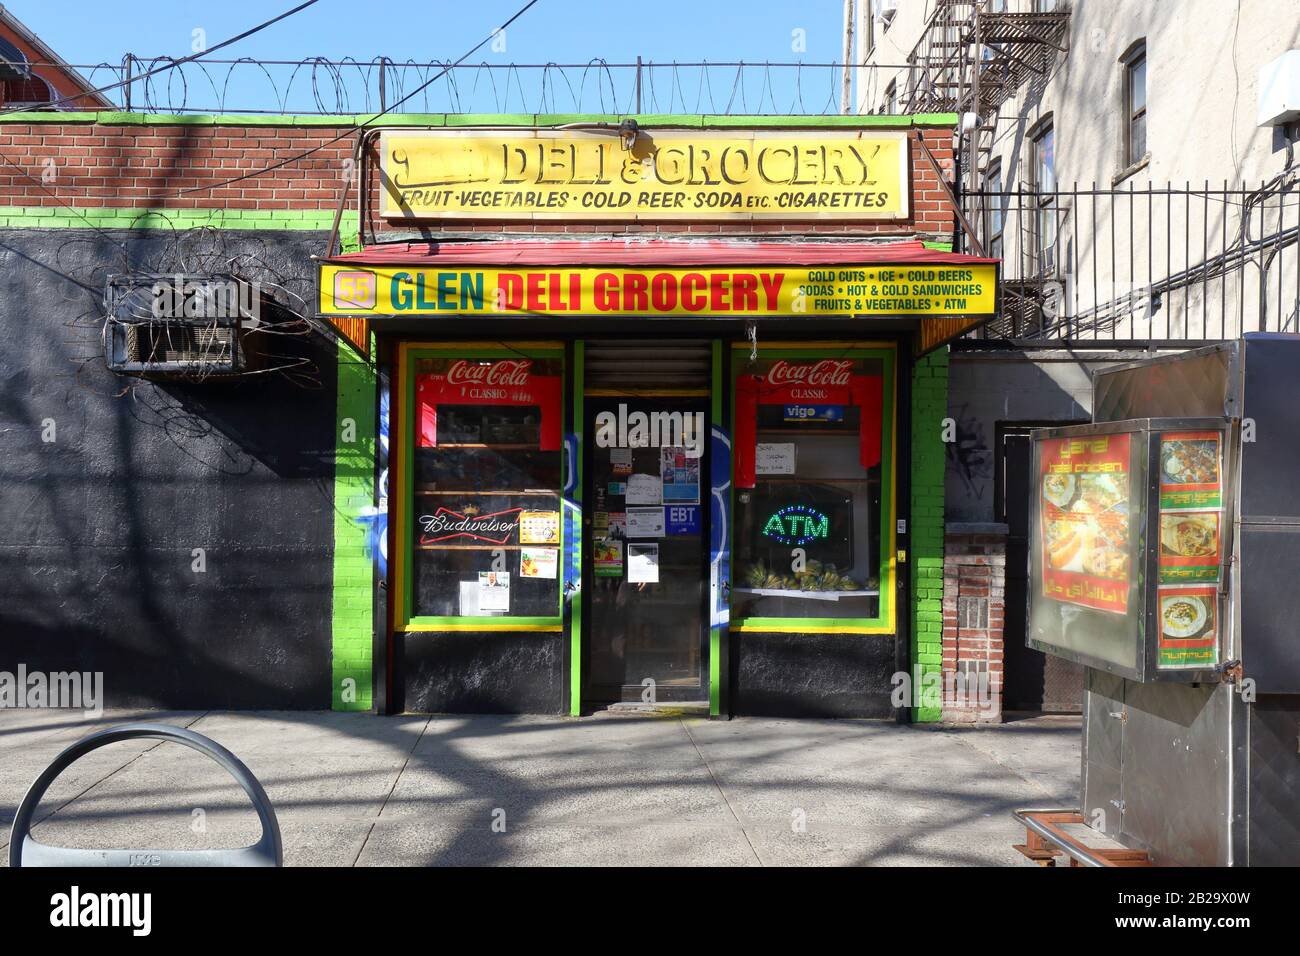 Glen Deli & Grocery, 55 Hegeman Ave, Brooklyn, NY. exterior storefront of a bodega in Brownsville. Stock Photo